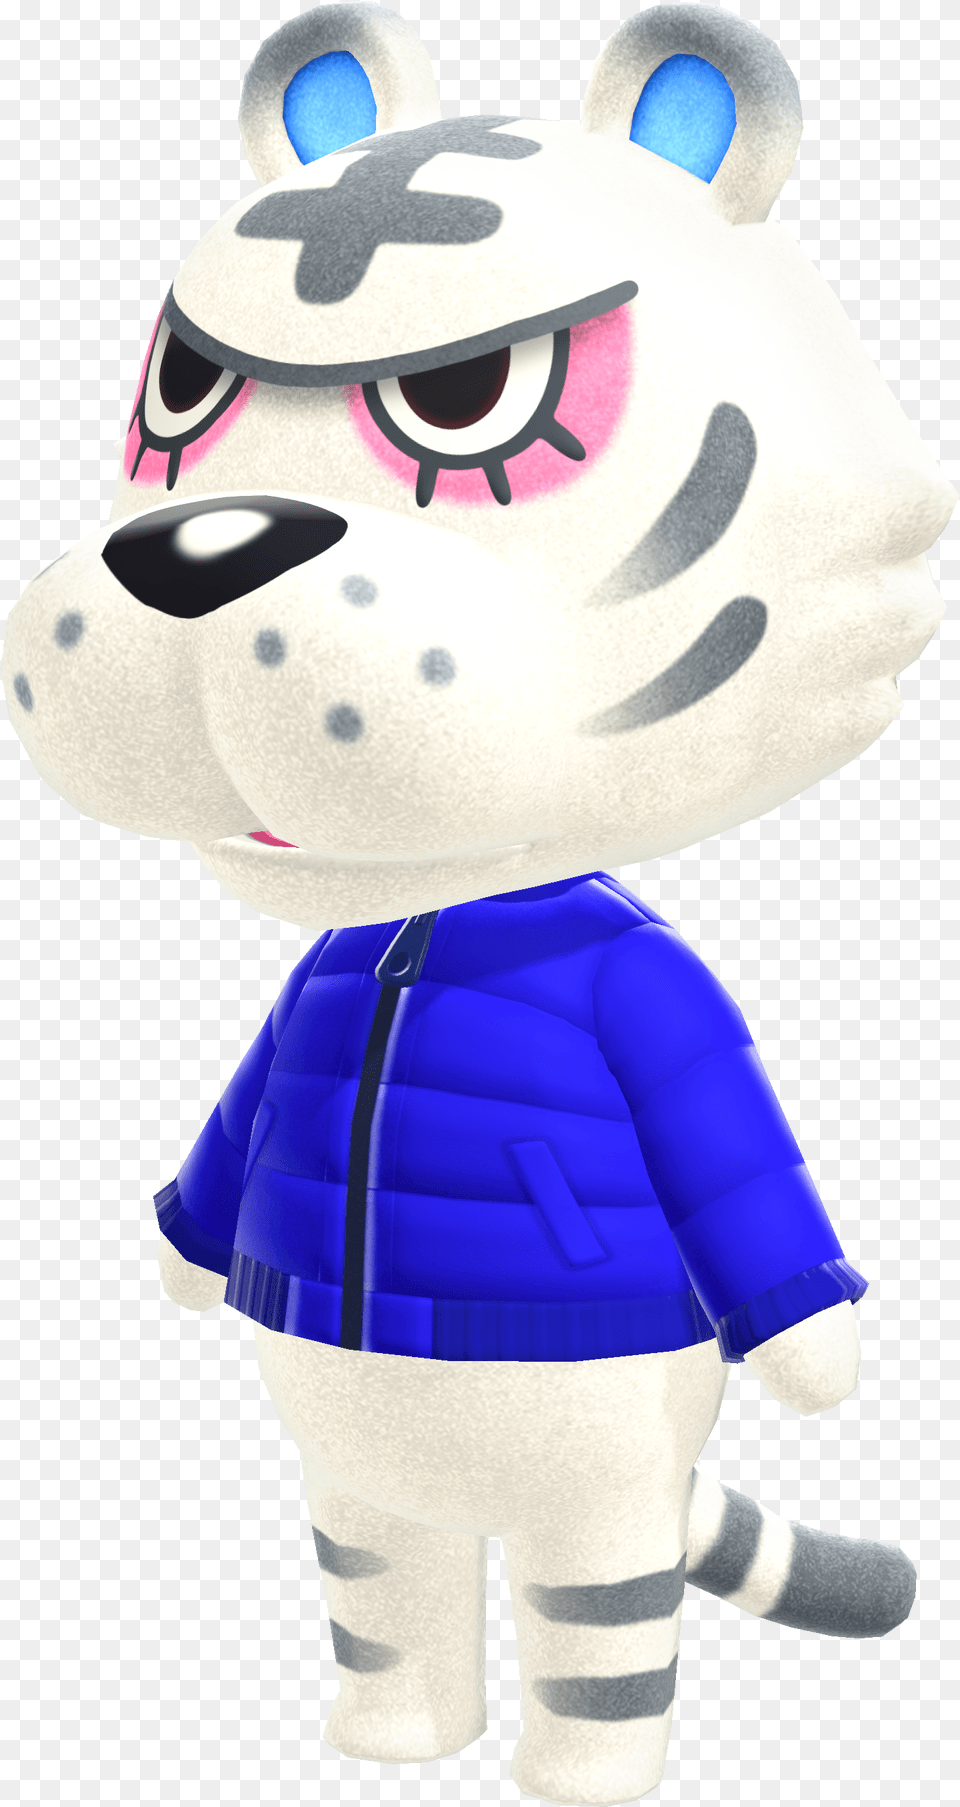 Rolf Animal Crossing Item And Villager Database Villagerdb Tiger Villager Animal Crossing, Plush, Toy, Mascot, Nature Free Png